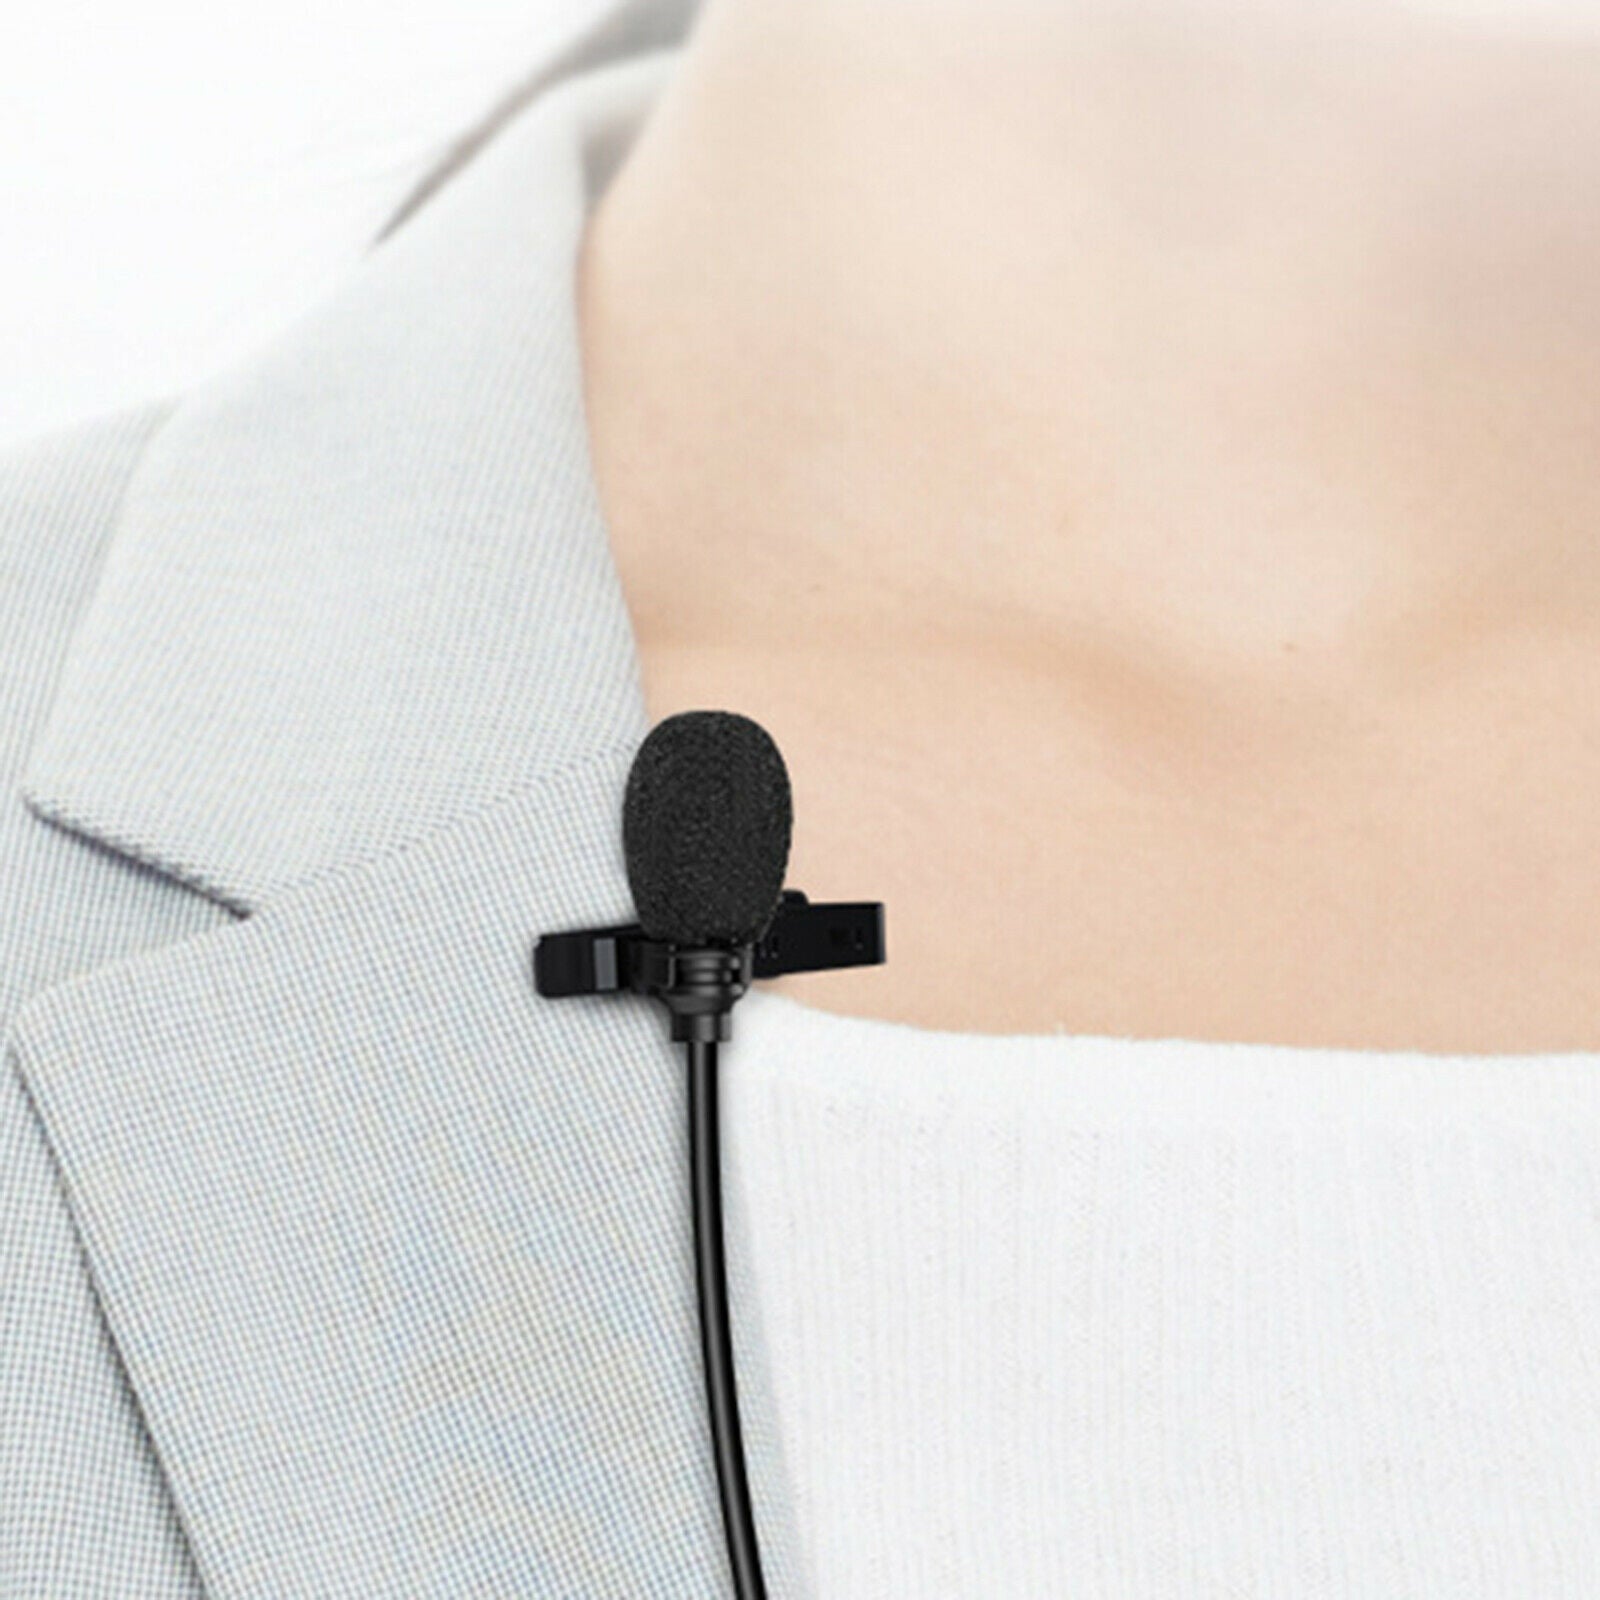 Portable Wireless Lavalier Lapel Microphone Clip-on for Computer Phone